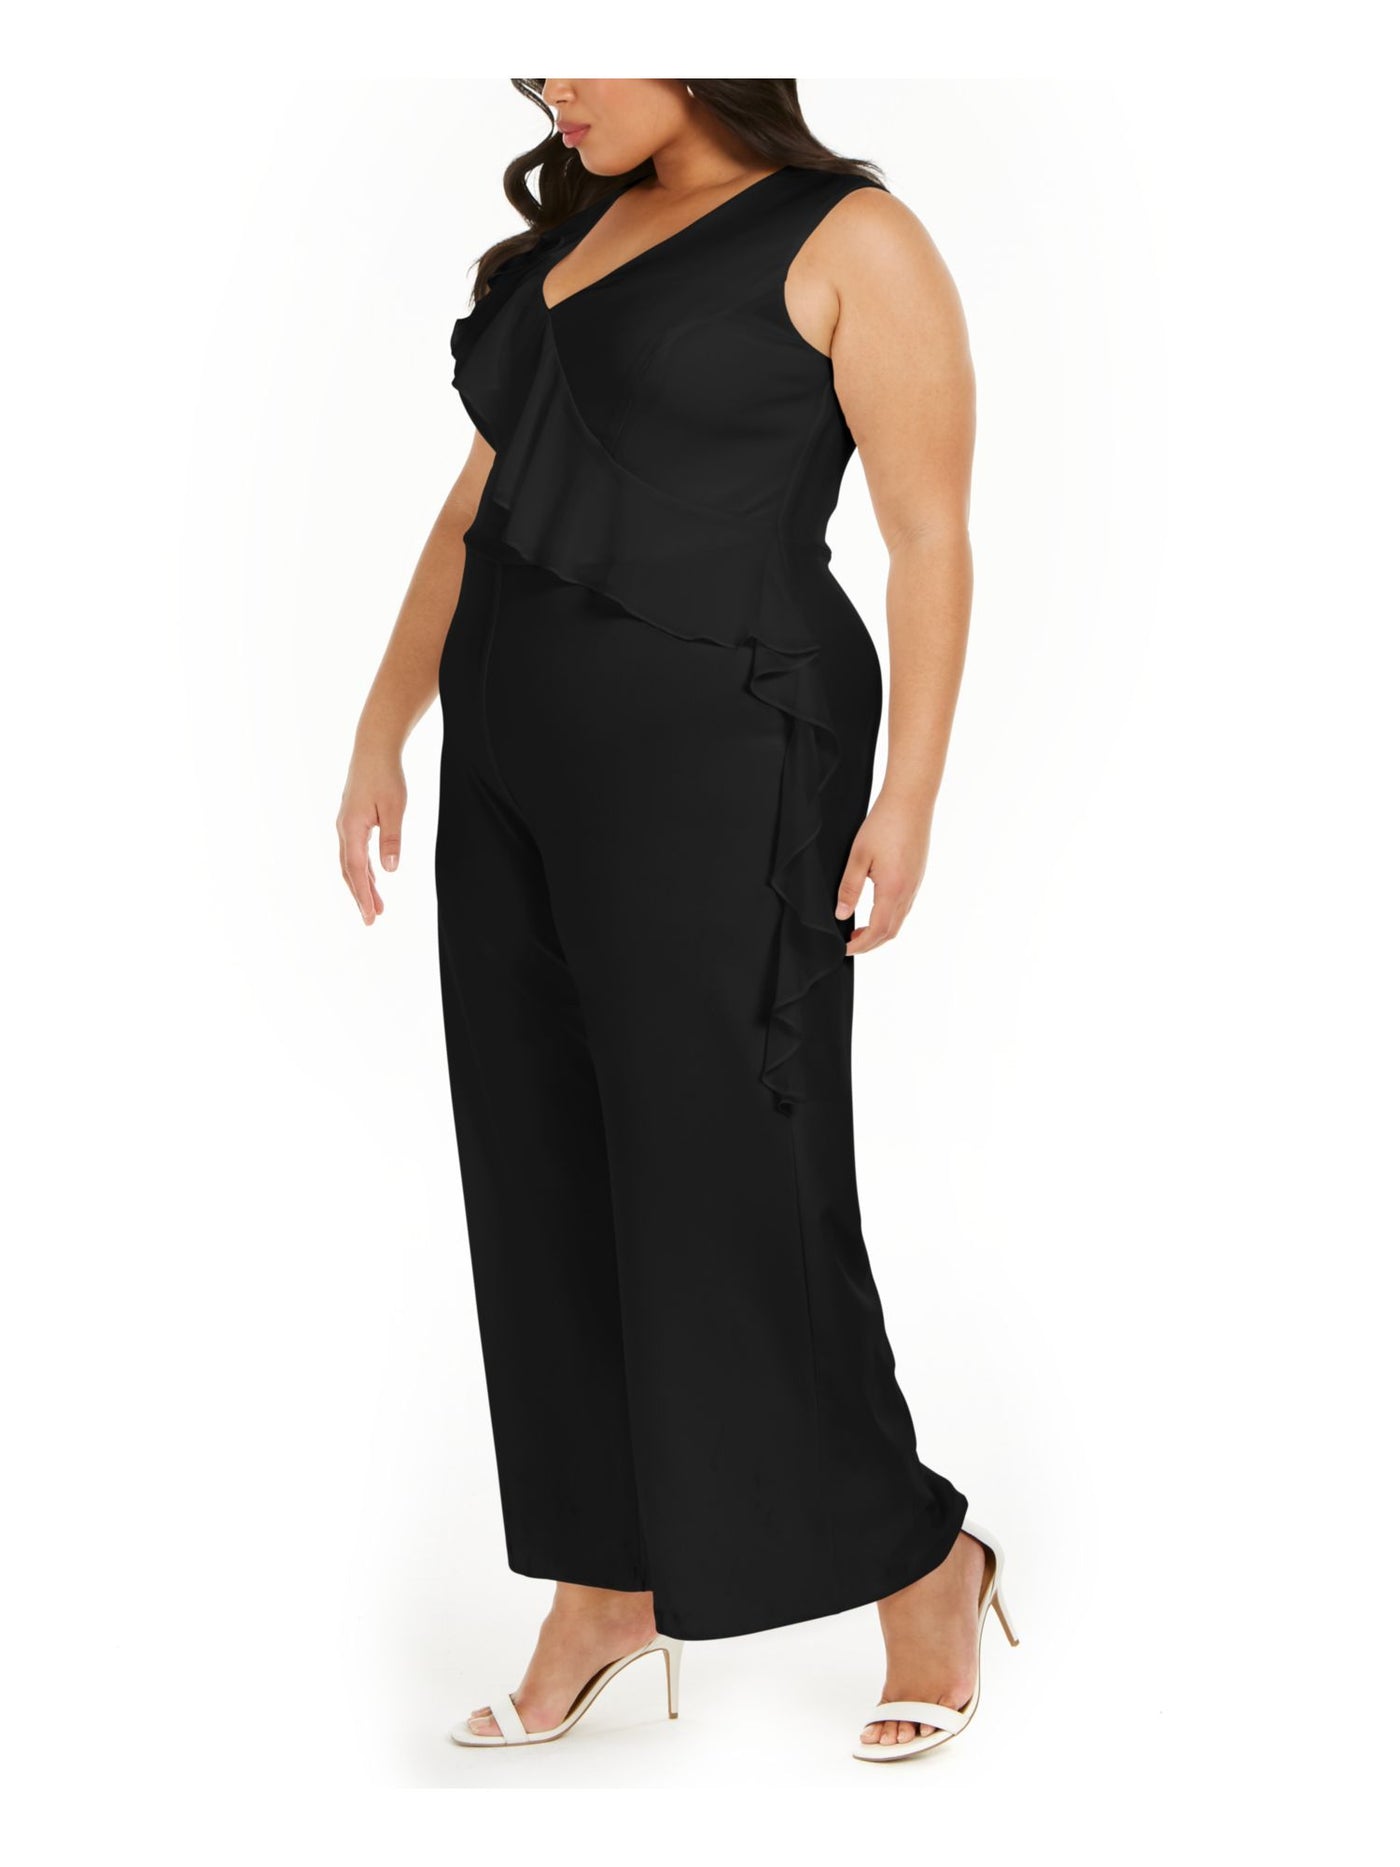 CONNECTED APPAREL Womens Ruffled Zippered Sheer Sleeveless V Neck Cocktail Wide Leg Jumpsuit